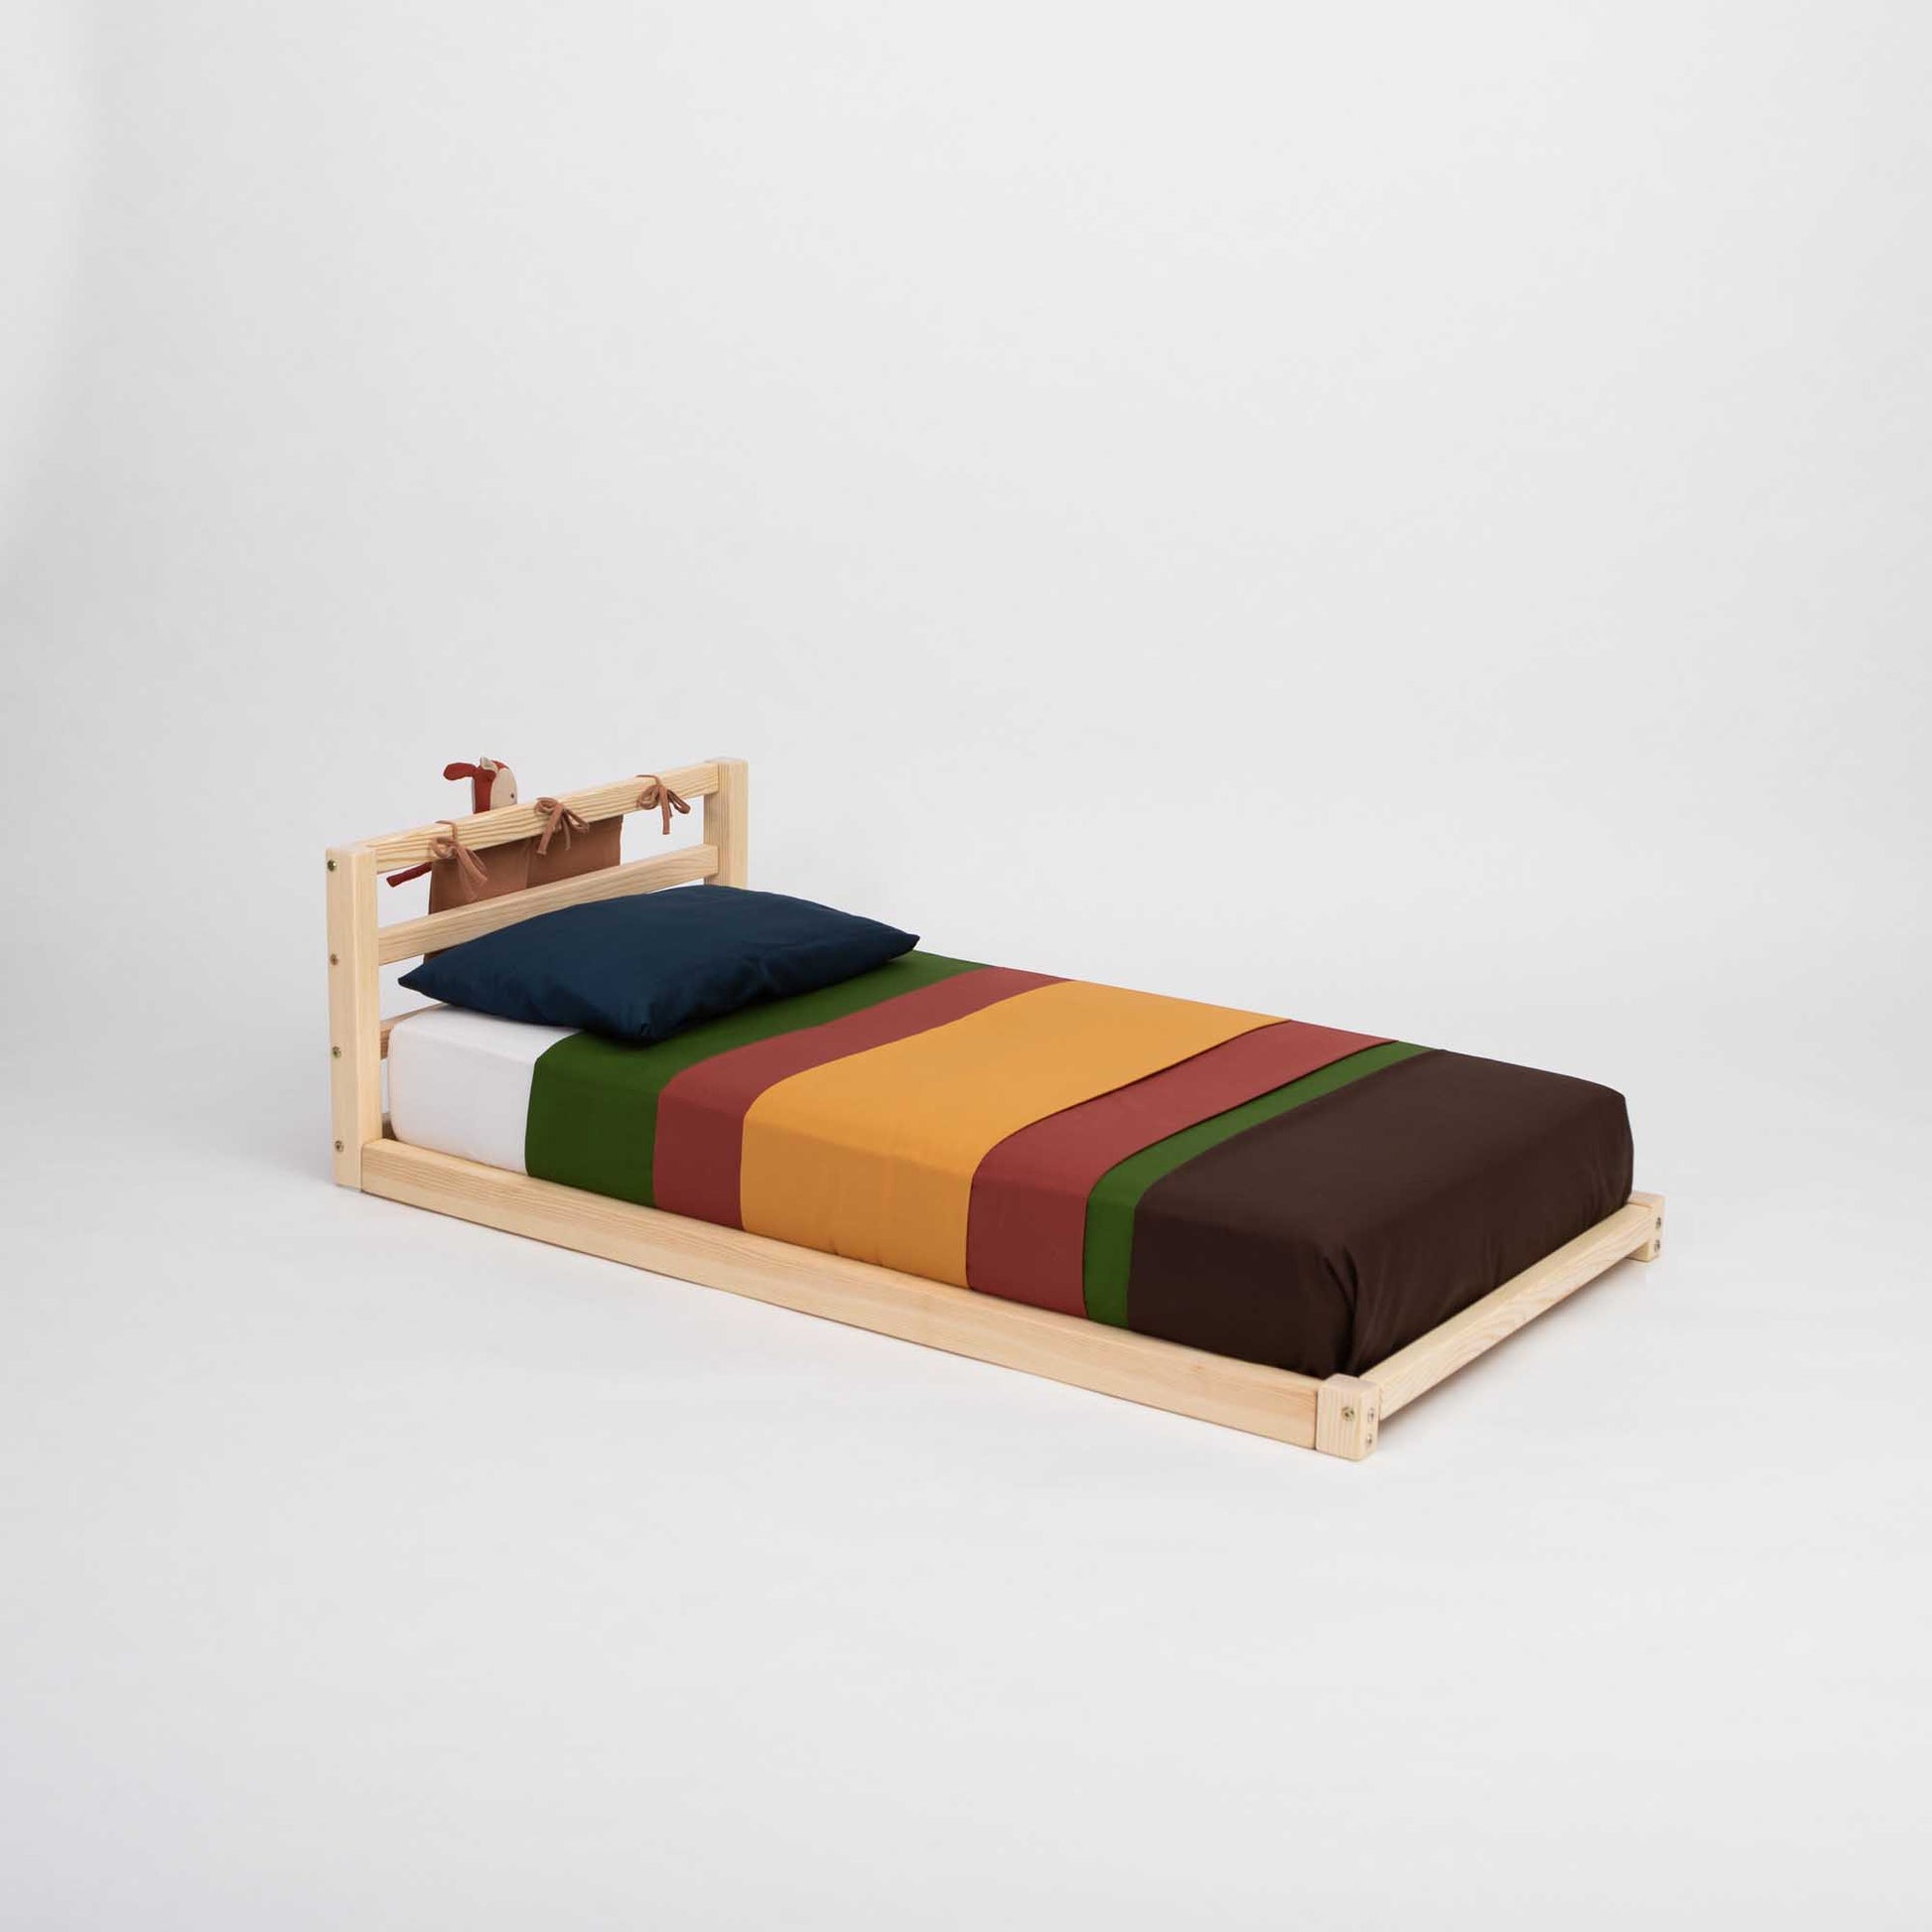 A Sweet Home From Wood toddler floor bed with a horizontal rail headboard and a colorful striped sheet.